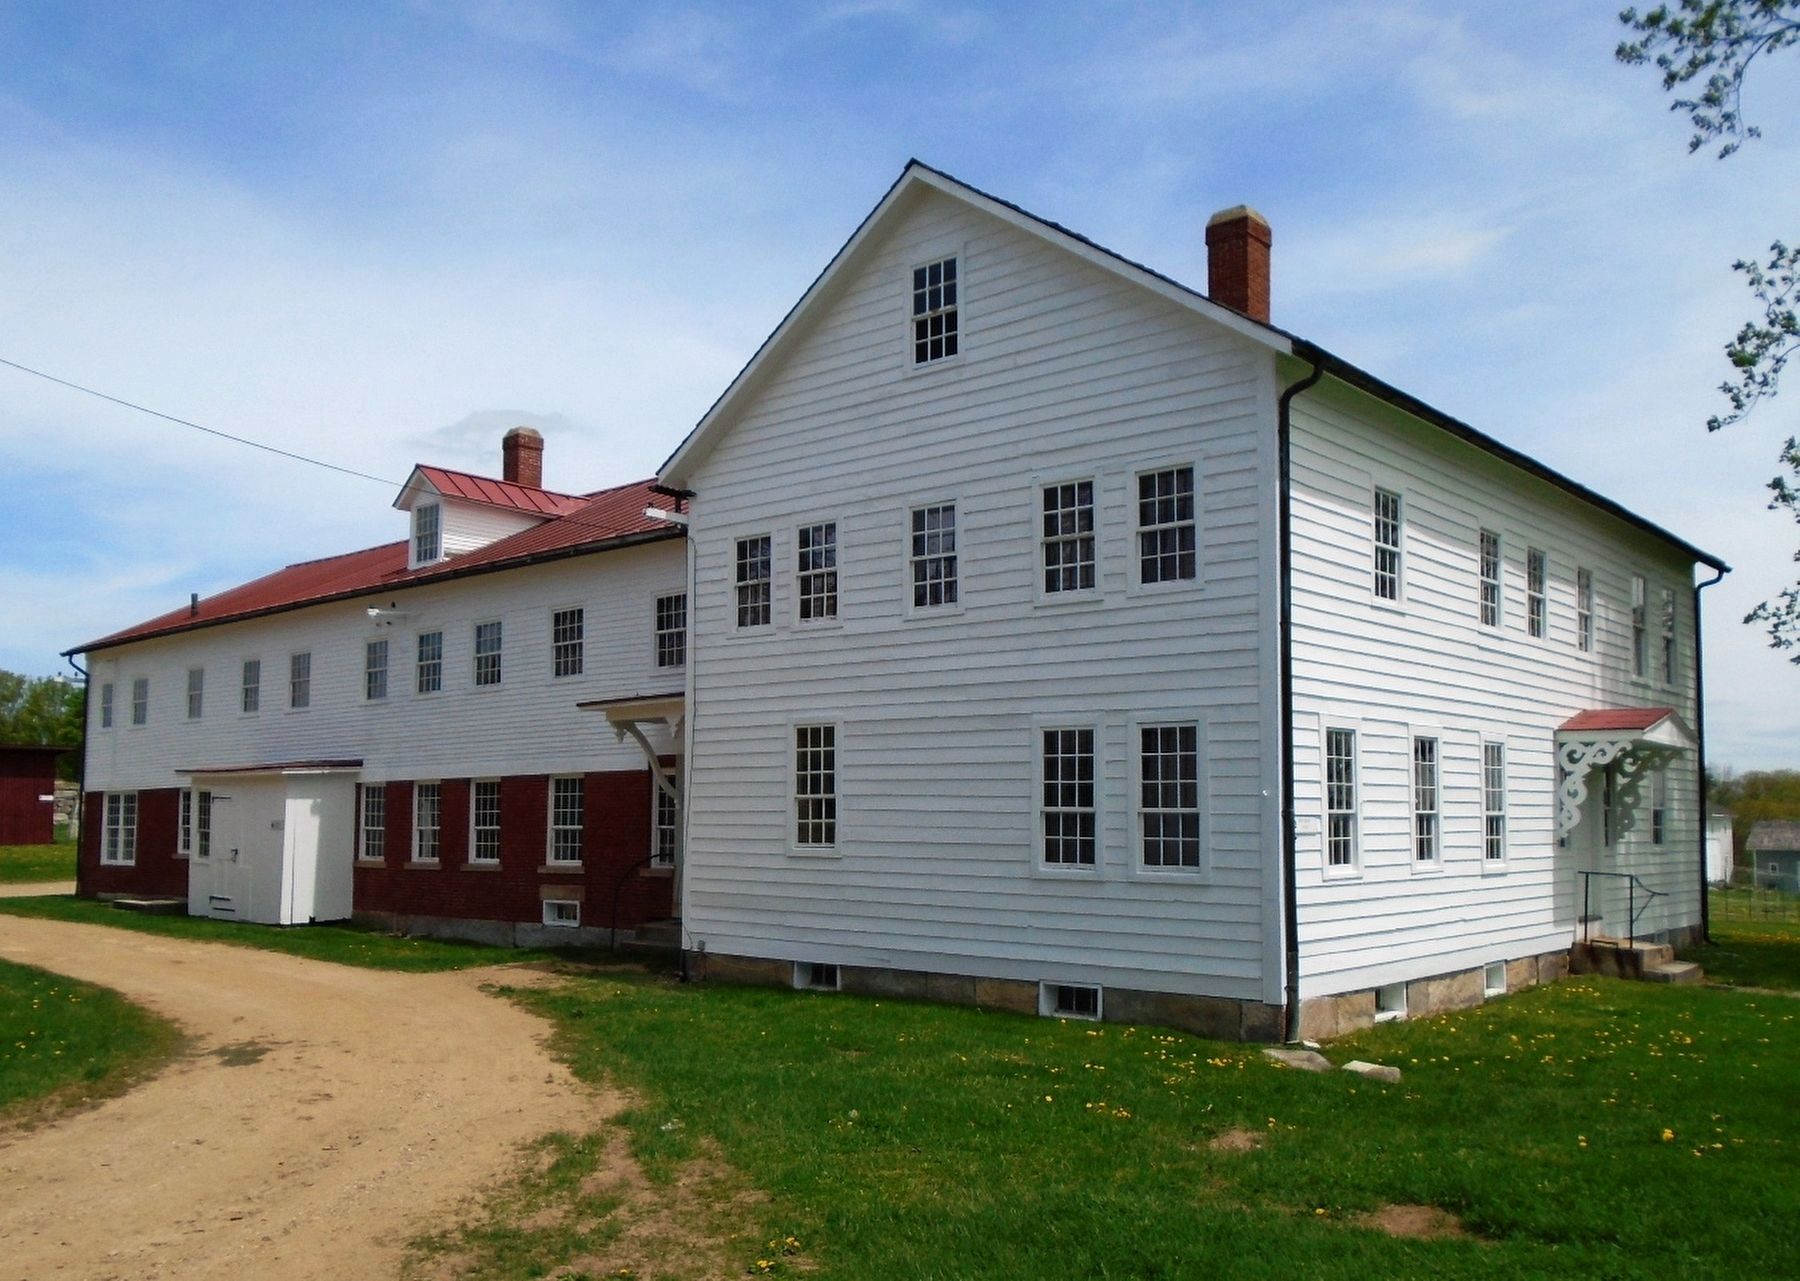 Spin Shop and Laundry at Canterbury Shaker Village image. Click for full size.